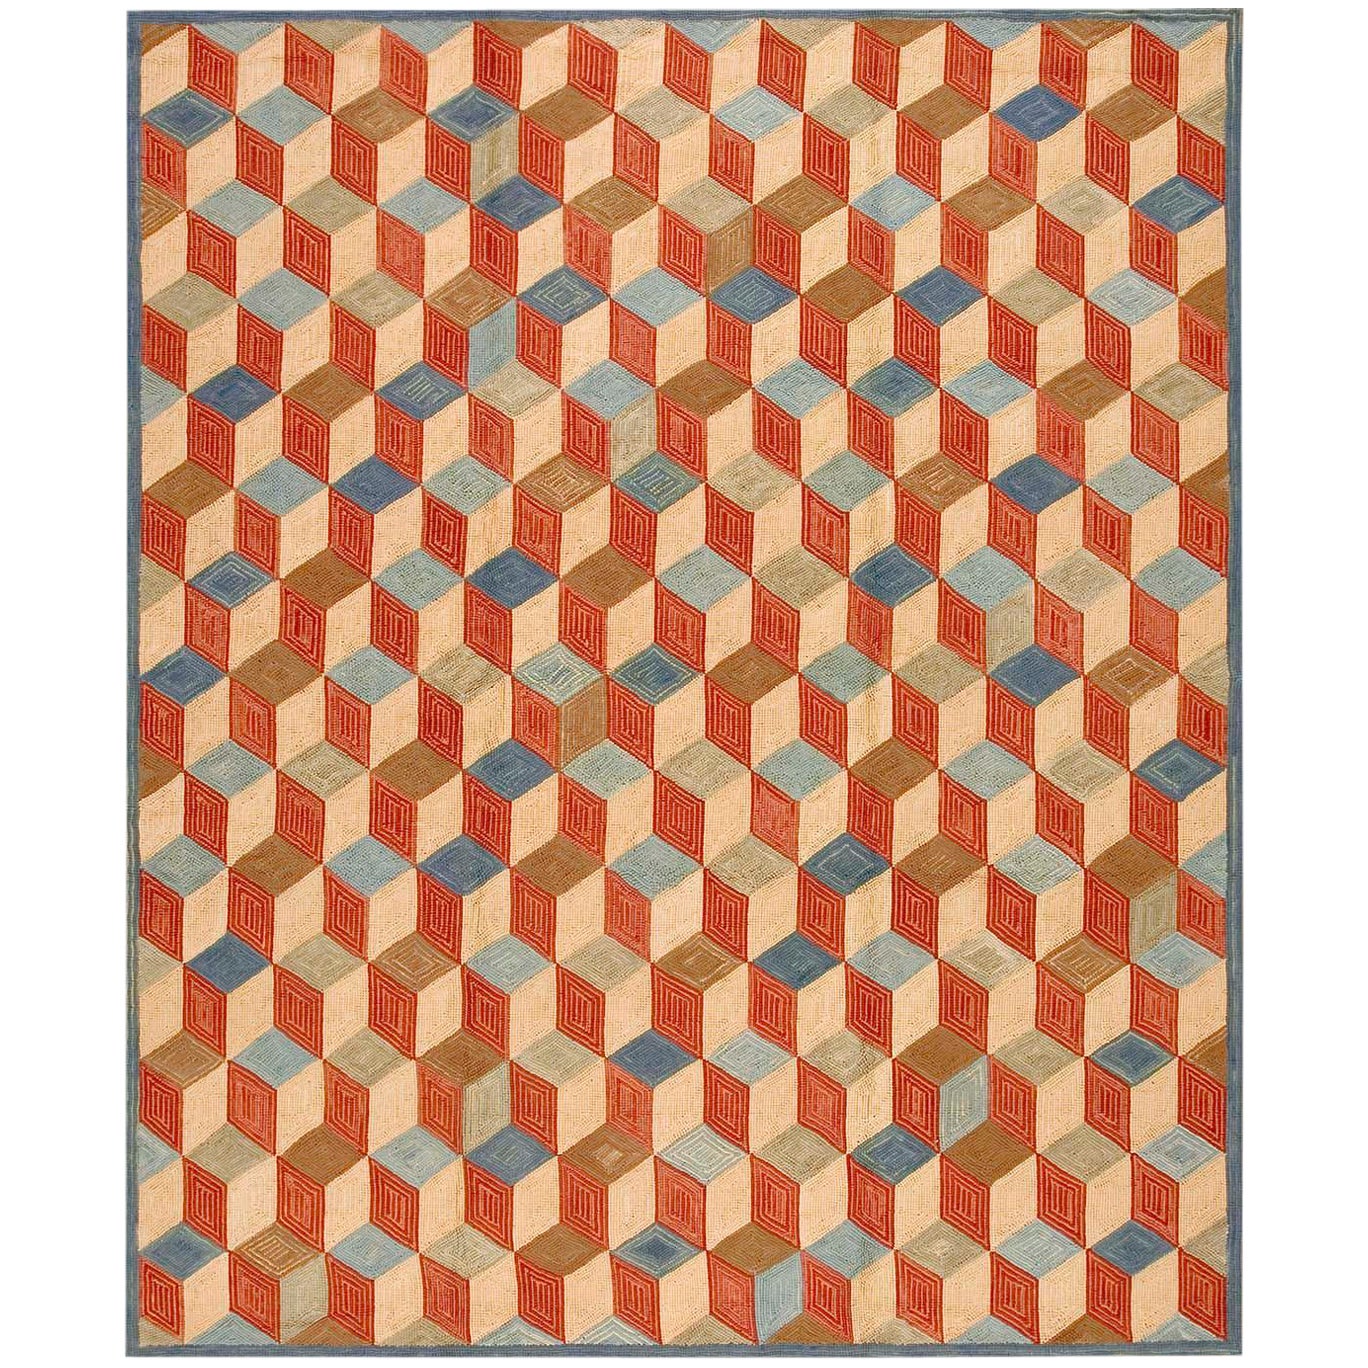 Contemporary American Hooked Rug 9' 0" x 12' 0" (1274 x 366) For Sale